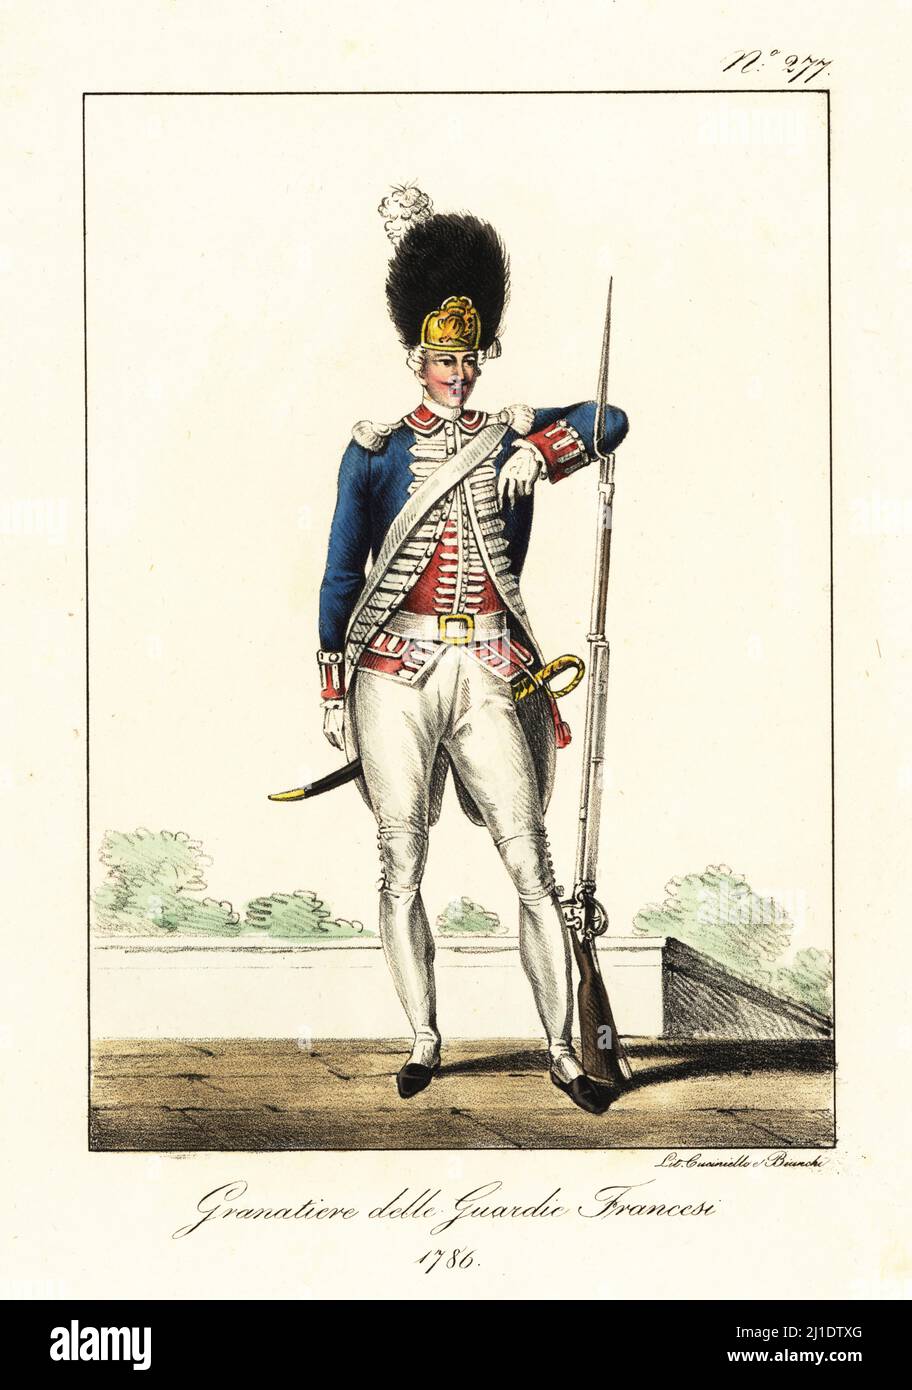 Grenadier of the French Guards, elite infantry regiment, 1786. In plumed bearskin helmet, blue coat with frogging and epaulettes, red waistcoat, white breeches, armed with sword and musket with bayonet. Grenadier aux Gardes Francaises. Handcoloured lithograph by Lorenzo Bianchi and Domenico Cuciniello after Hippolyte Lecomte from Costumi civili e militari della monarchia francese dal 1200 al 1820, Naples, 1825. Italian edition of Lecomte’s Civilian and military costumes of the French monarchy from 1200 to 1820. Stock Photo